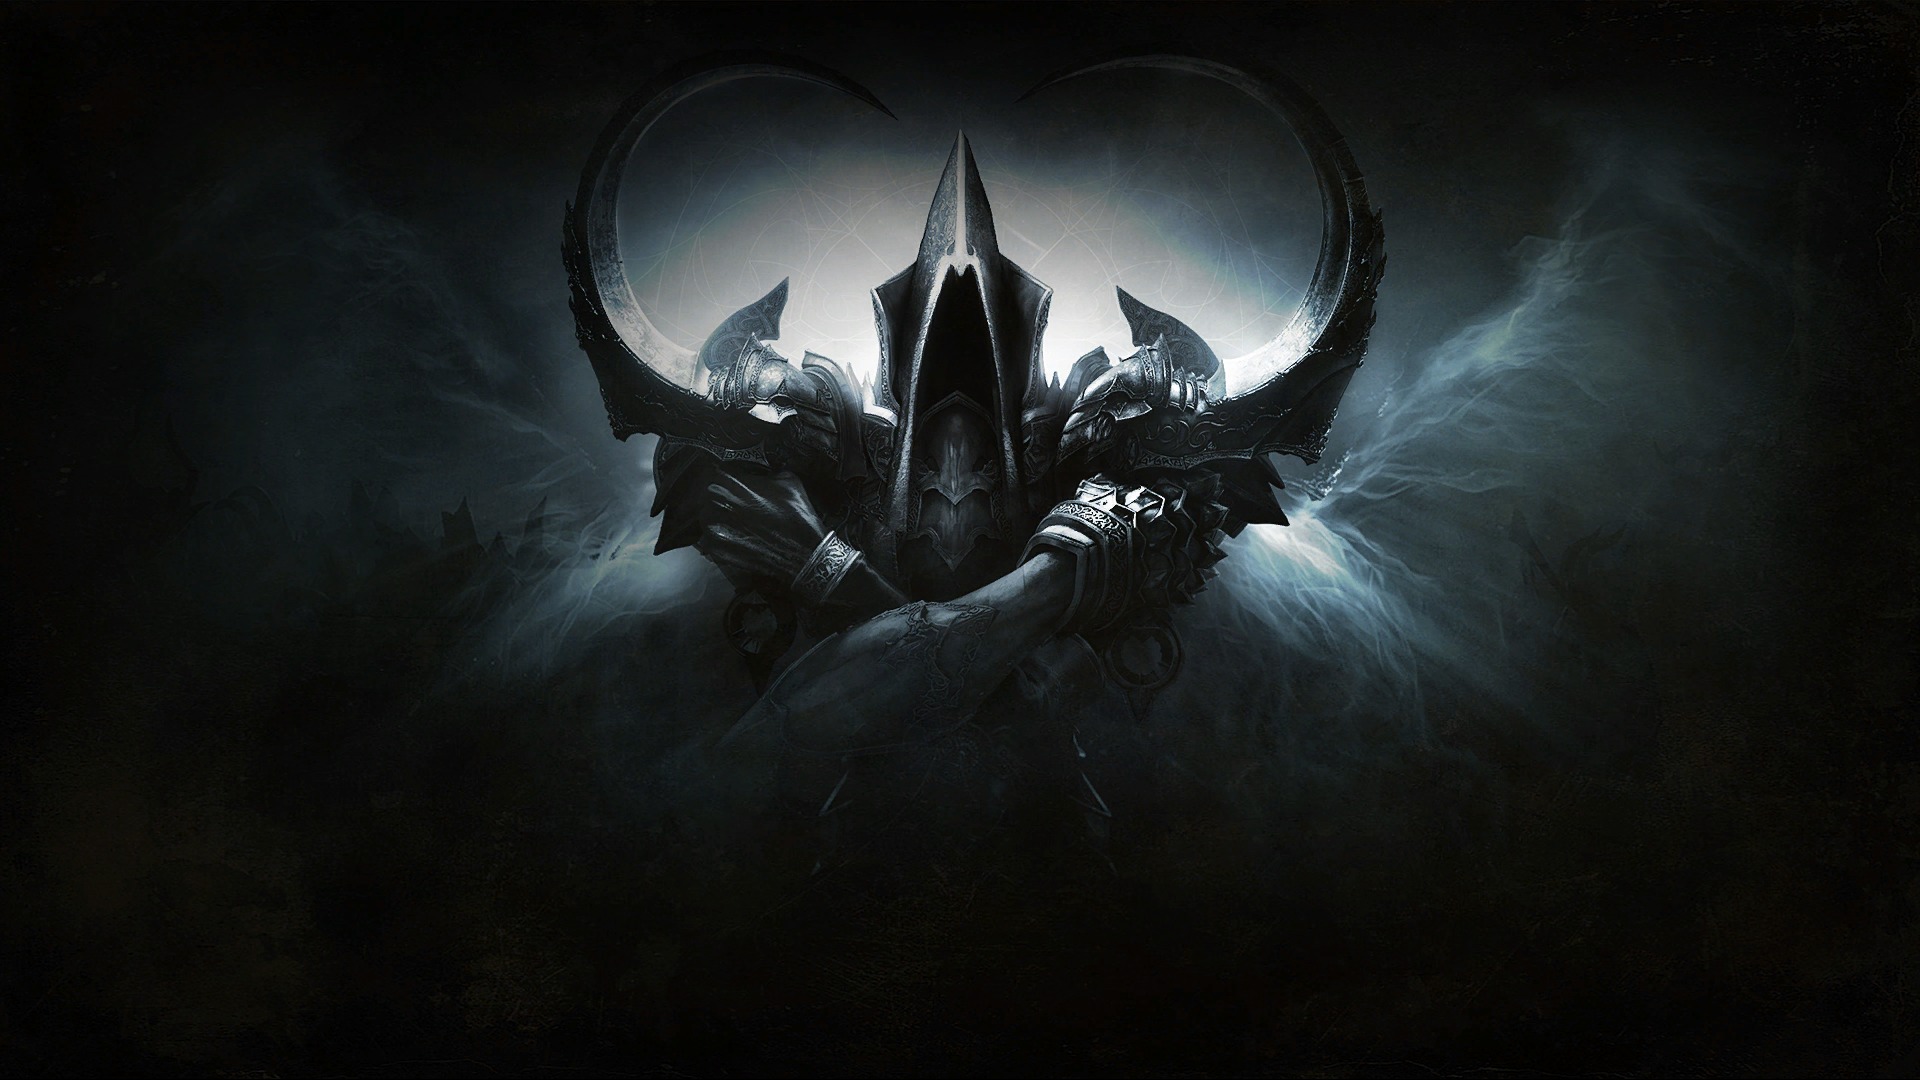 Diablo III: Ultimate Evil Edition (PS4) Review | High-Def Digest